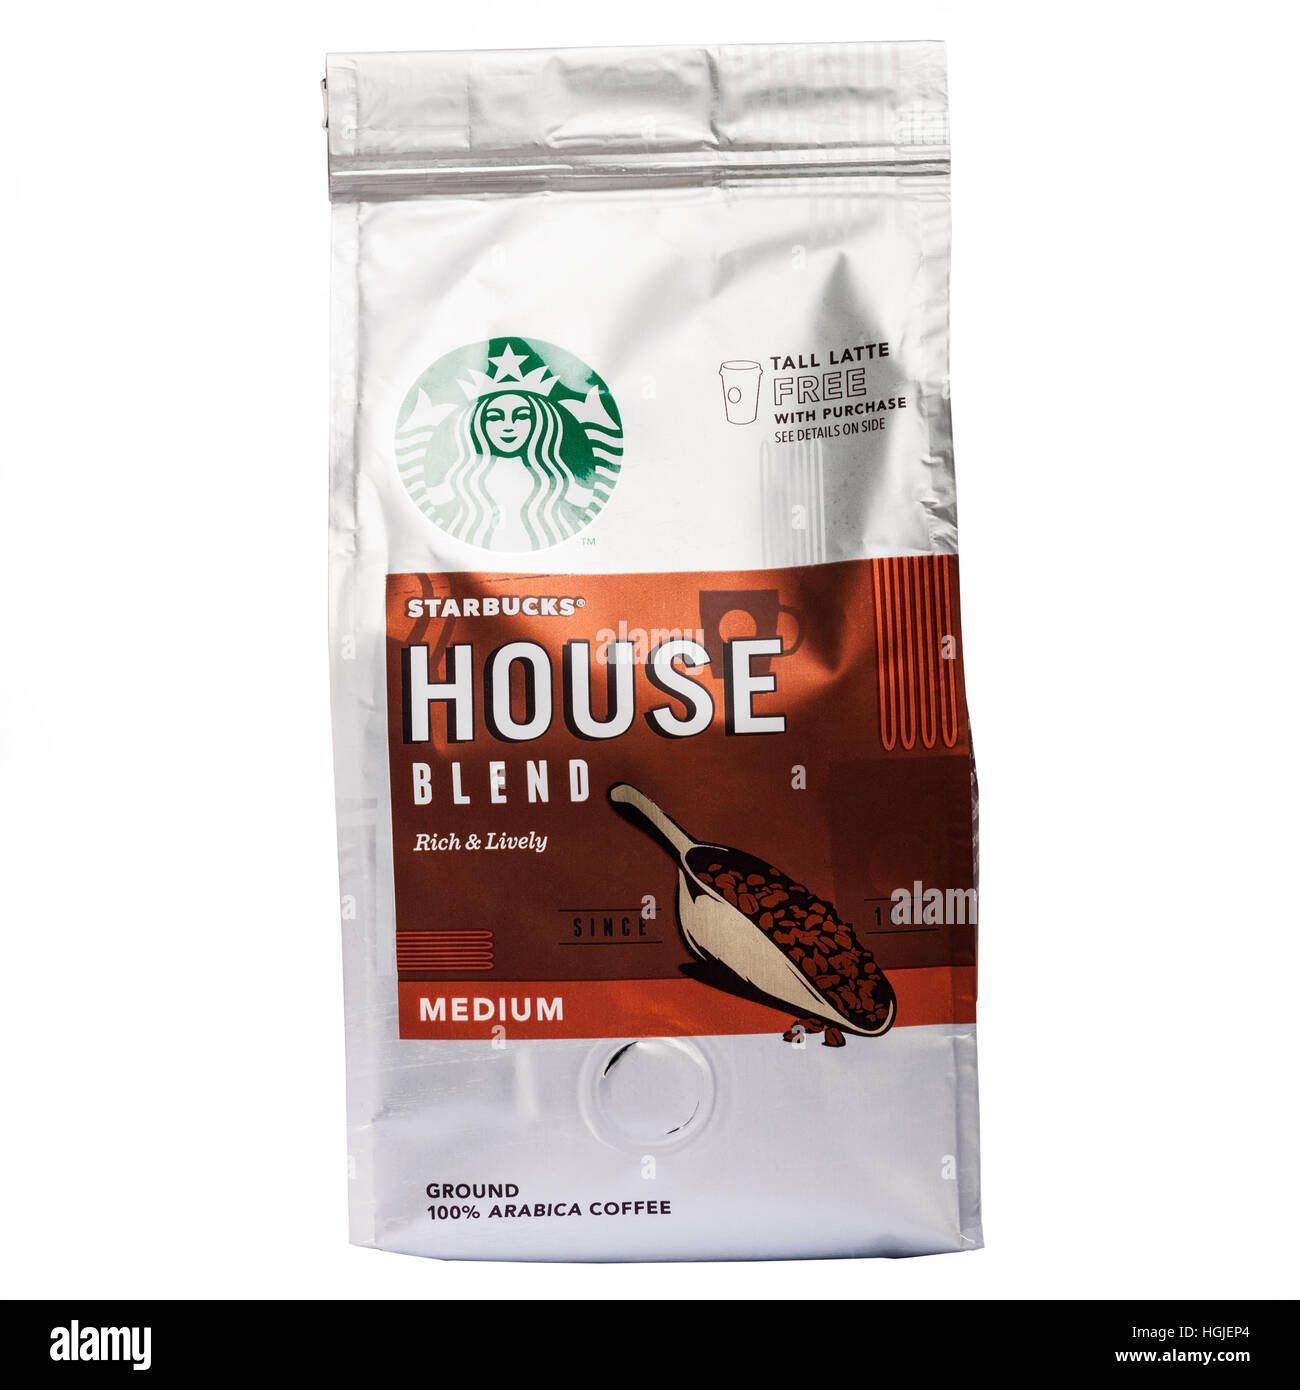 A pack of starbucks house blend ground coffee on a white background Stock Photo